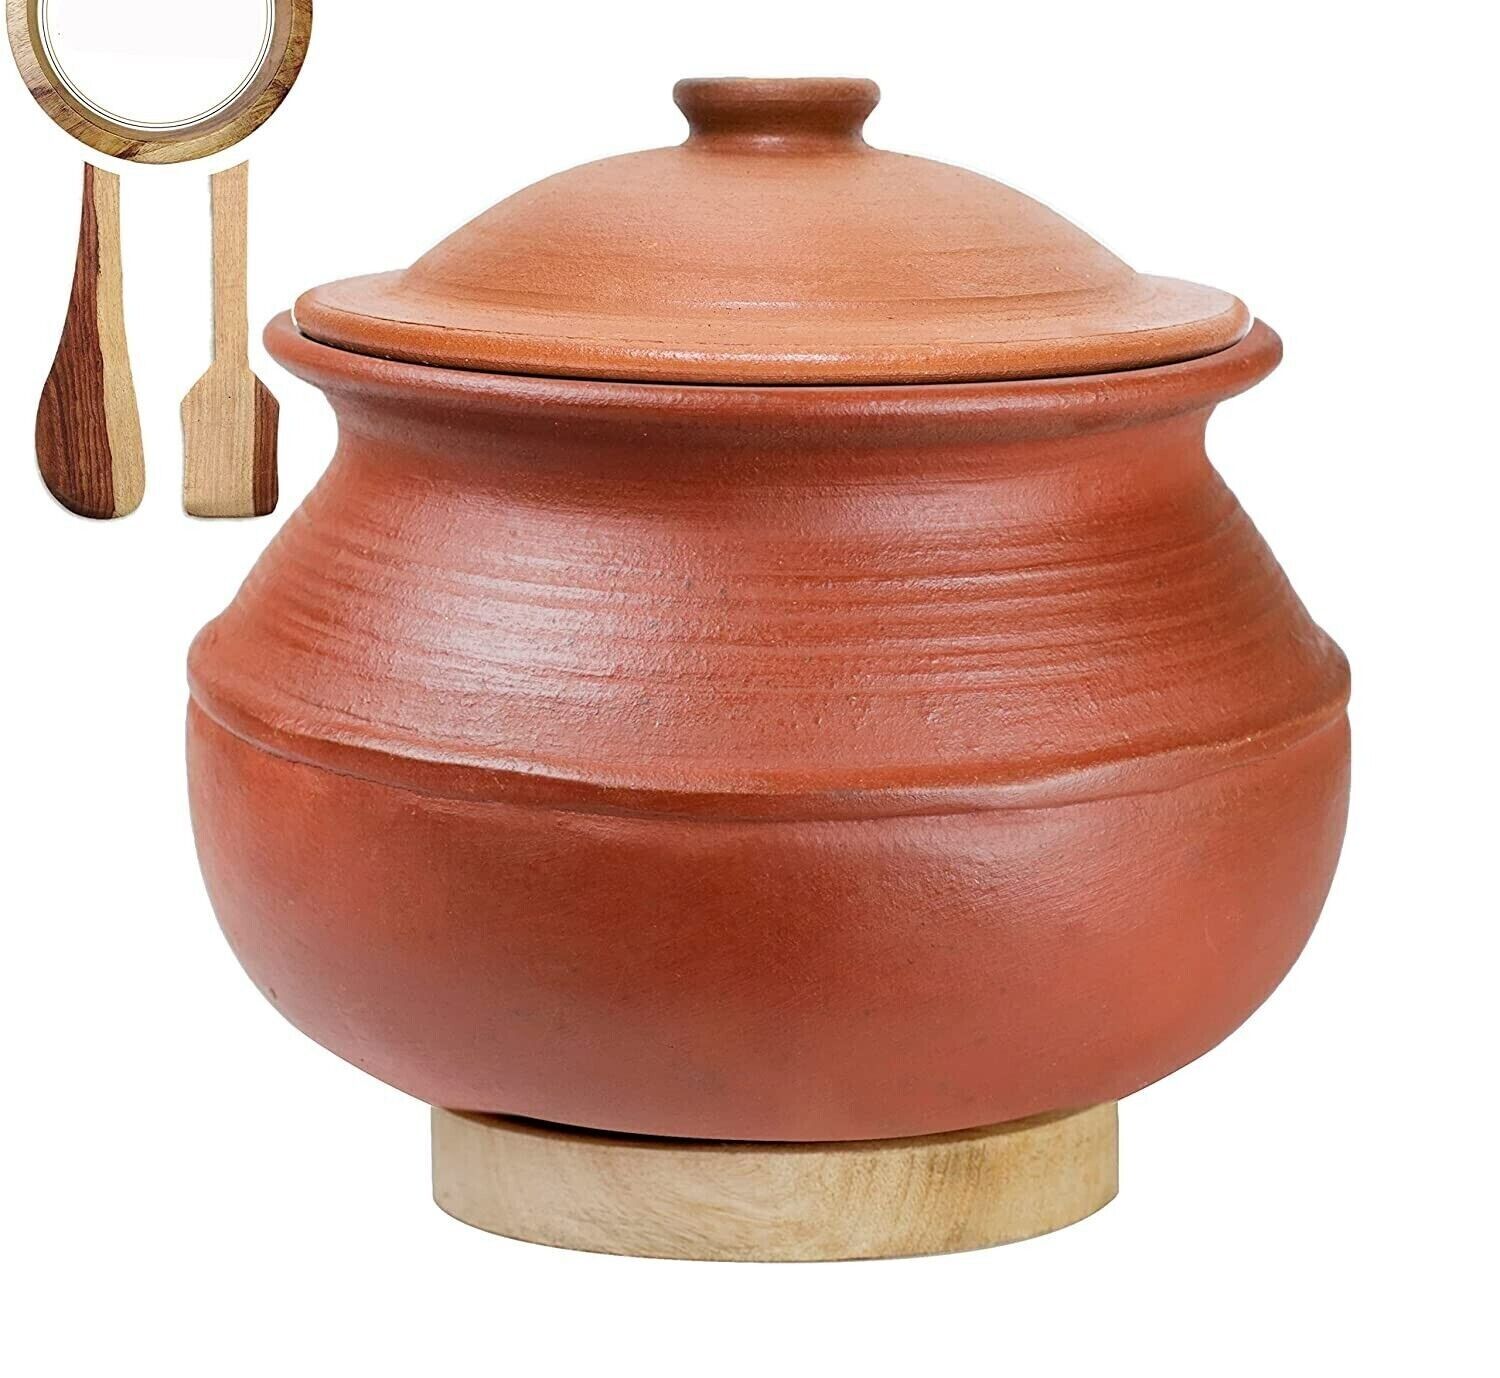 Handmade Terracotta Unglazed Clay Handi/Earthen Pot for Cooking with Lid Red 2 L